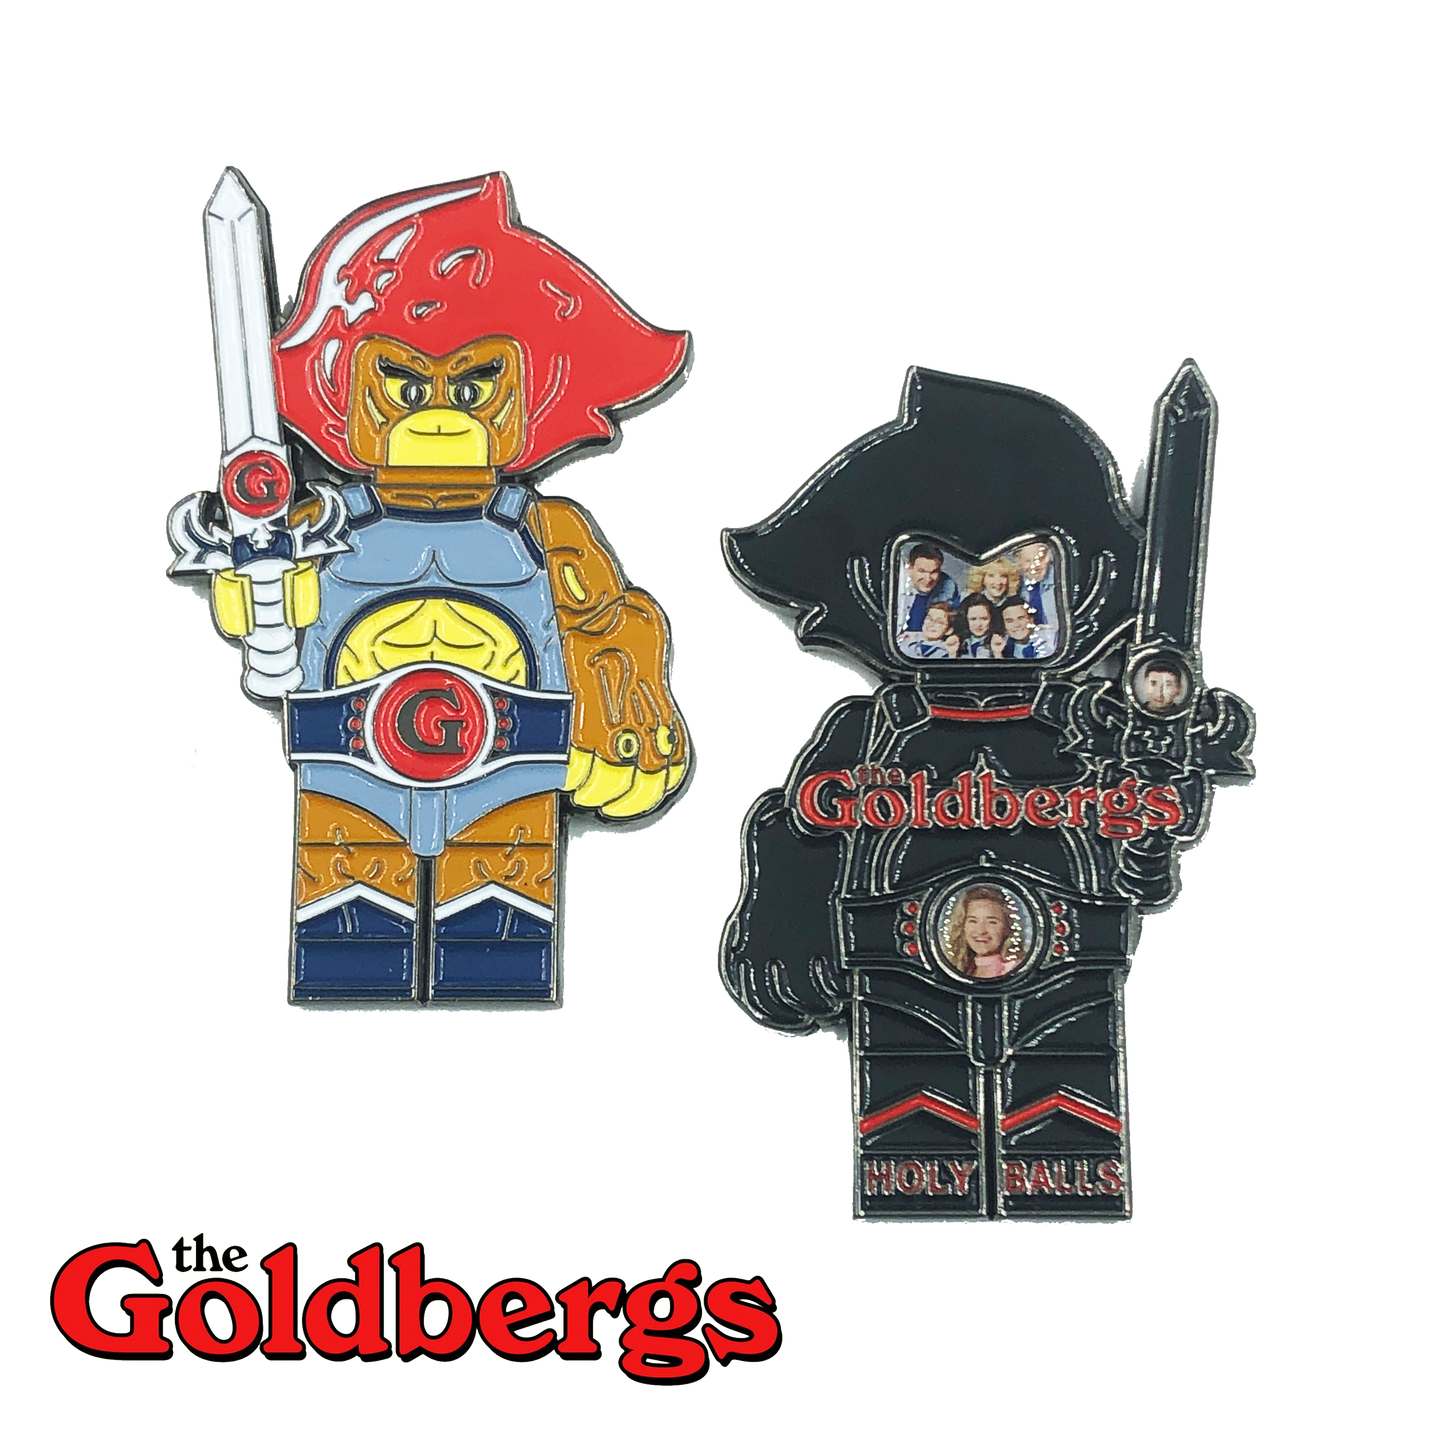 E-012 Officially Licensed Challenge Coin The Goldbergs Thundercats Lion-O inspired Challenge Coin